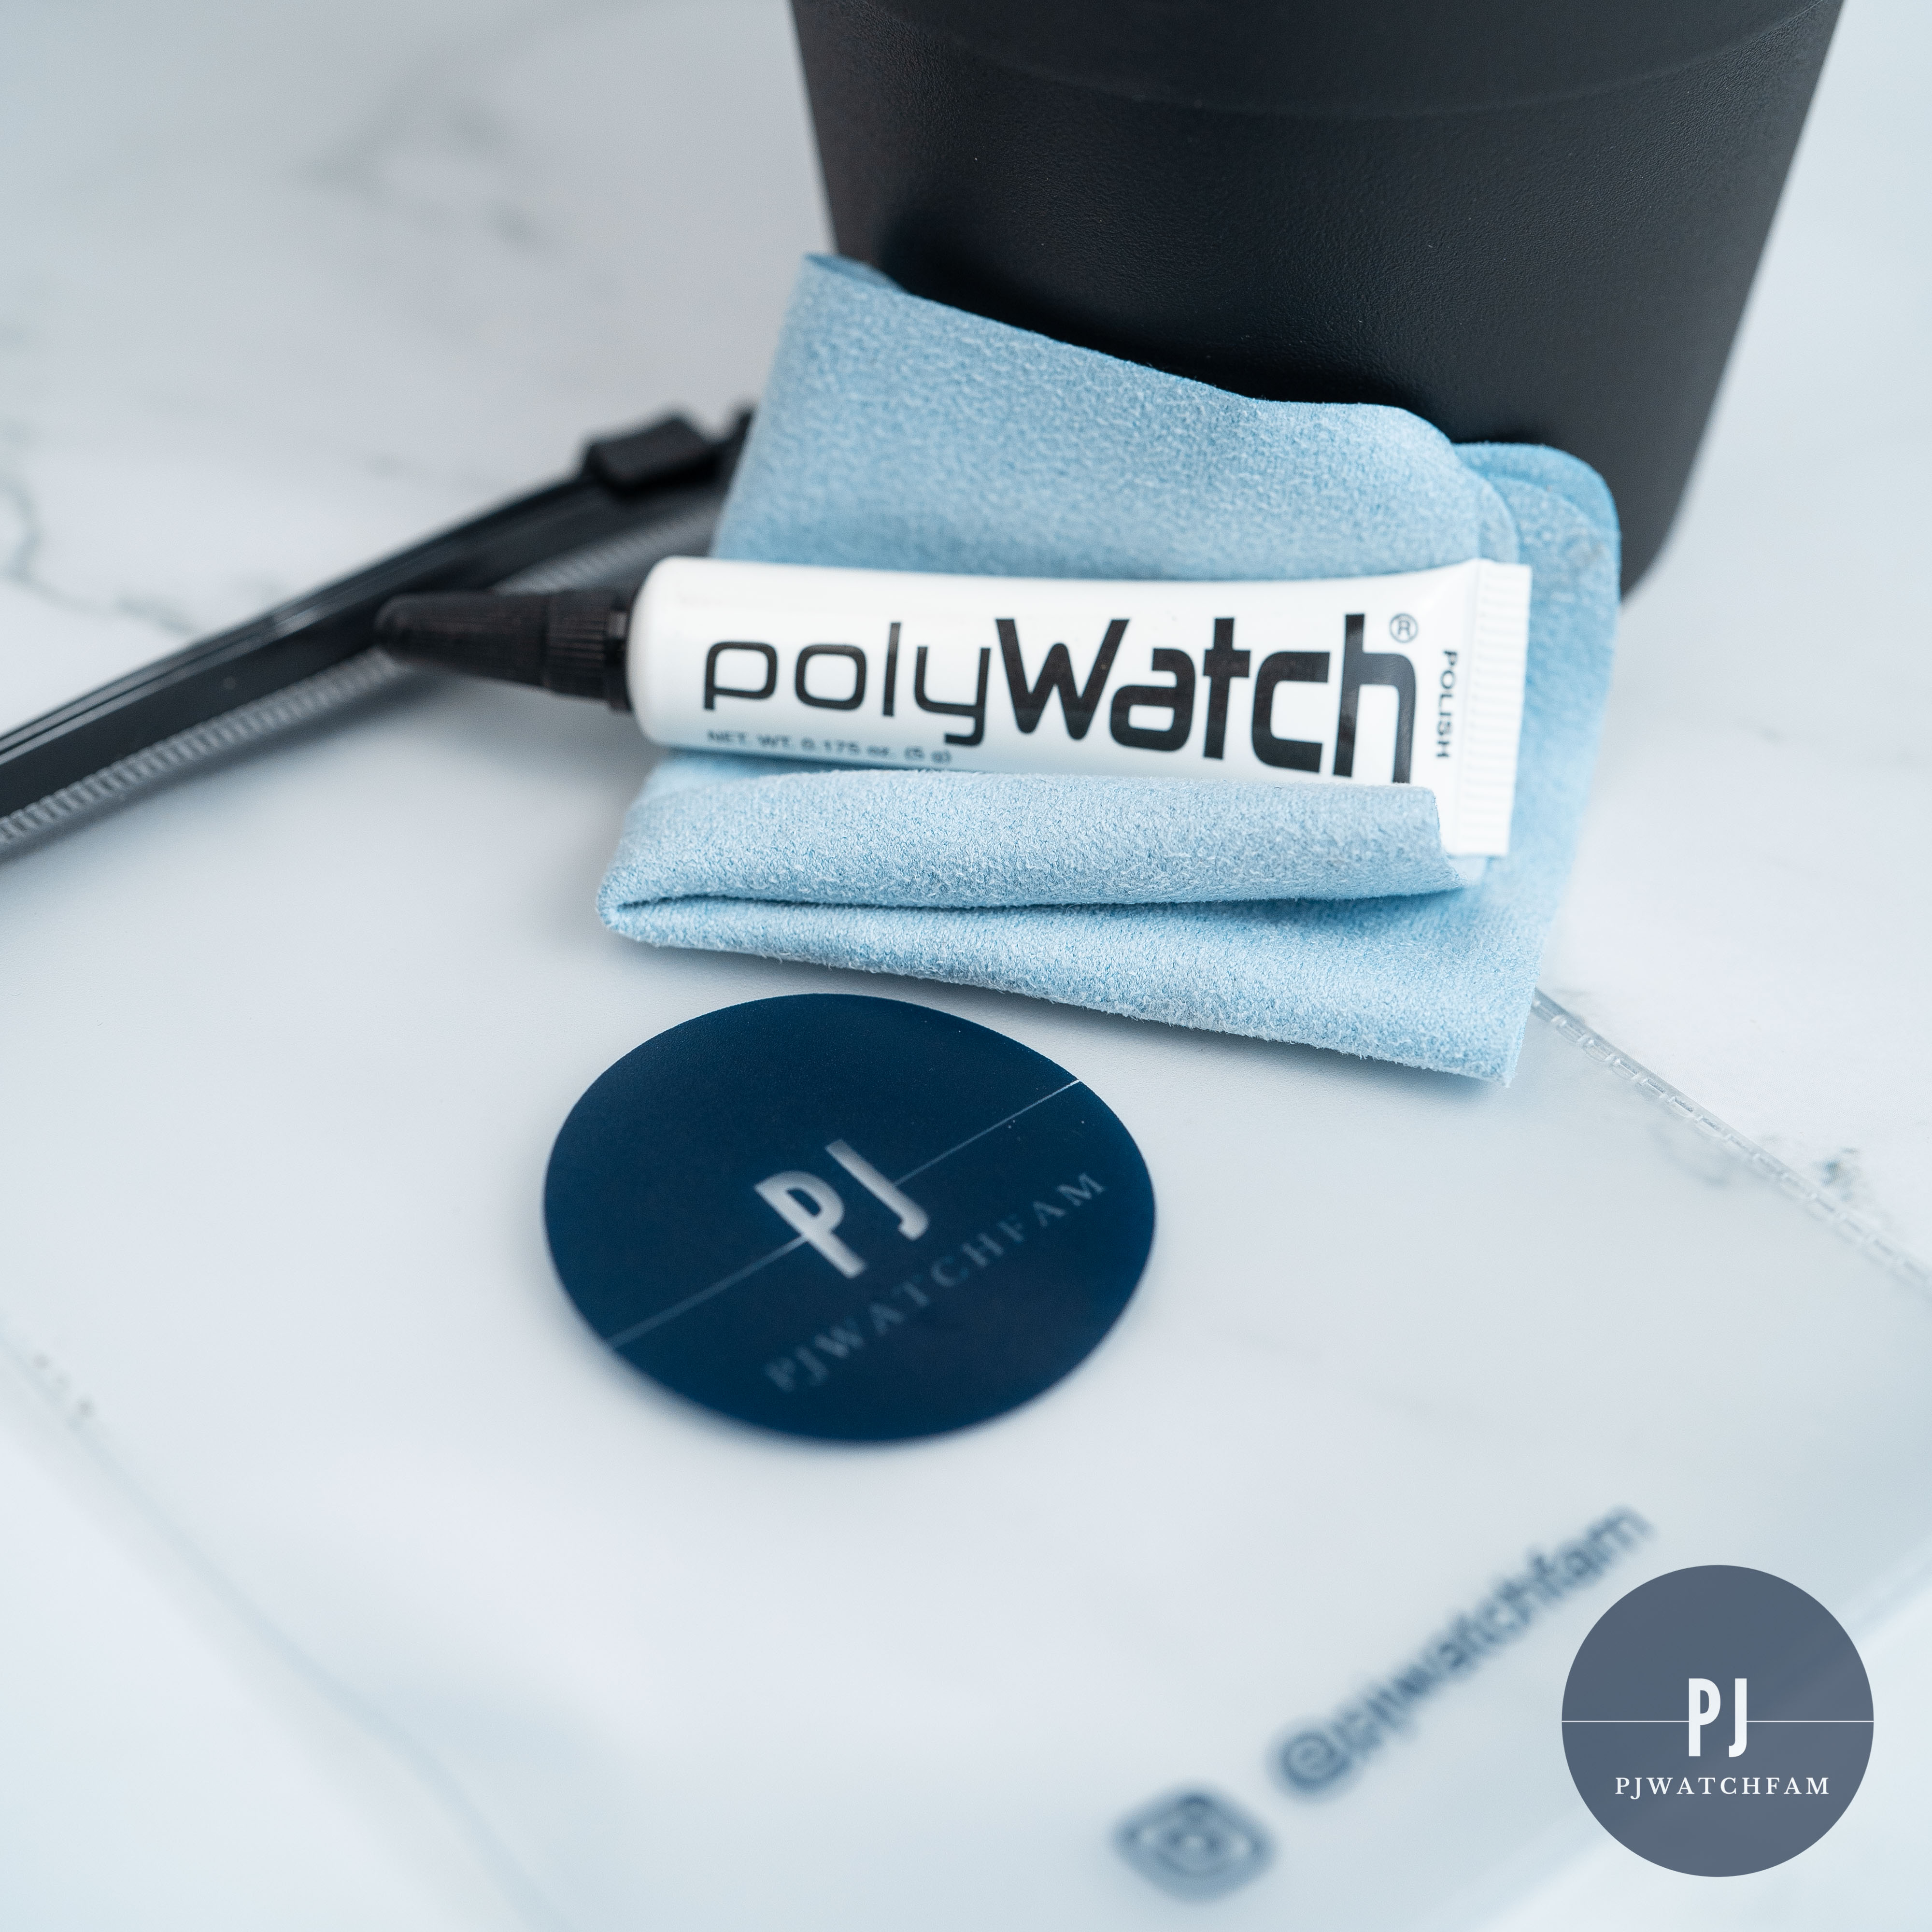 Polywatch Poly Watch Plastic Crystal Glass Polish & Scratch Remover Repair  Tool Set with Cloth